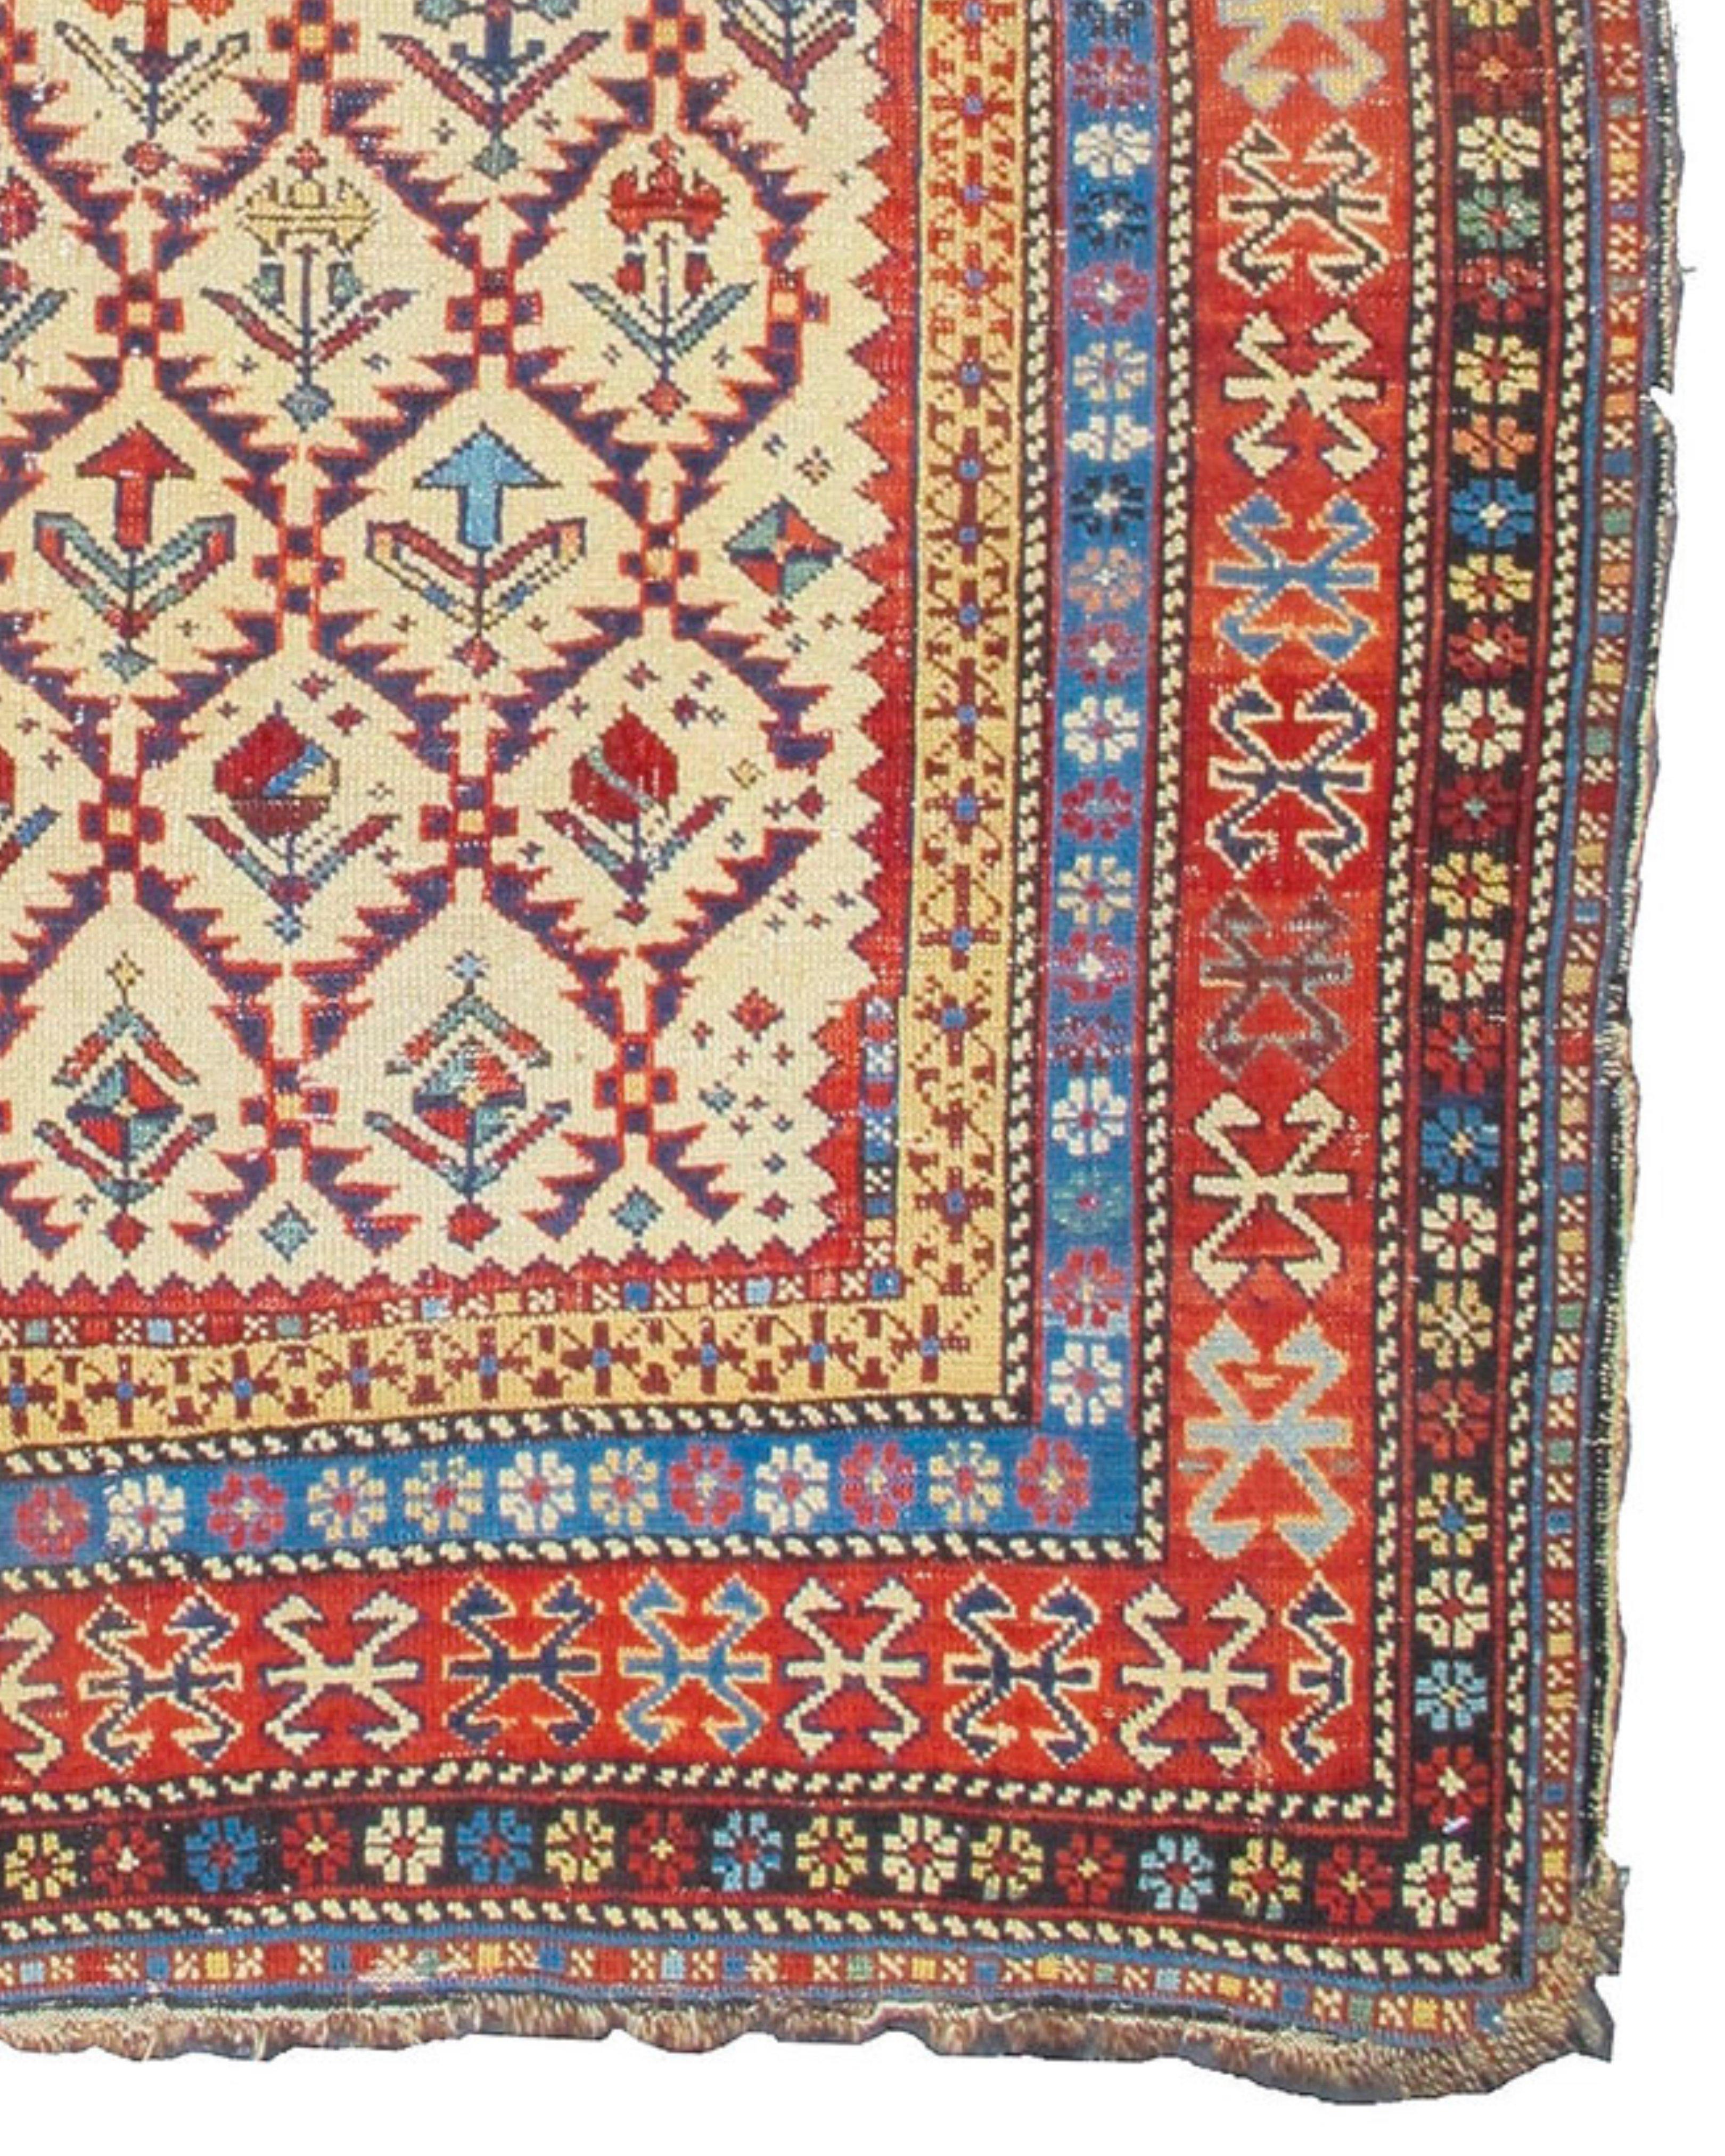 Antique Shirvan Prayer Rug, 19th Century In Excellent Condition For Sale In San Francisco, CA